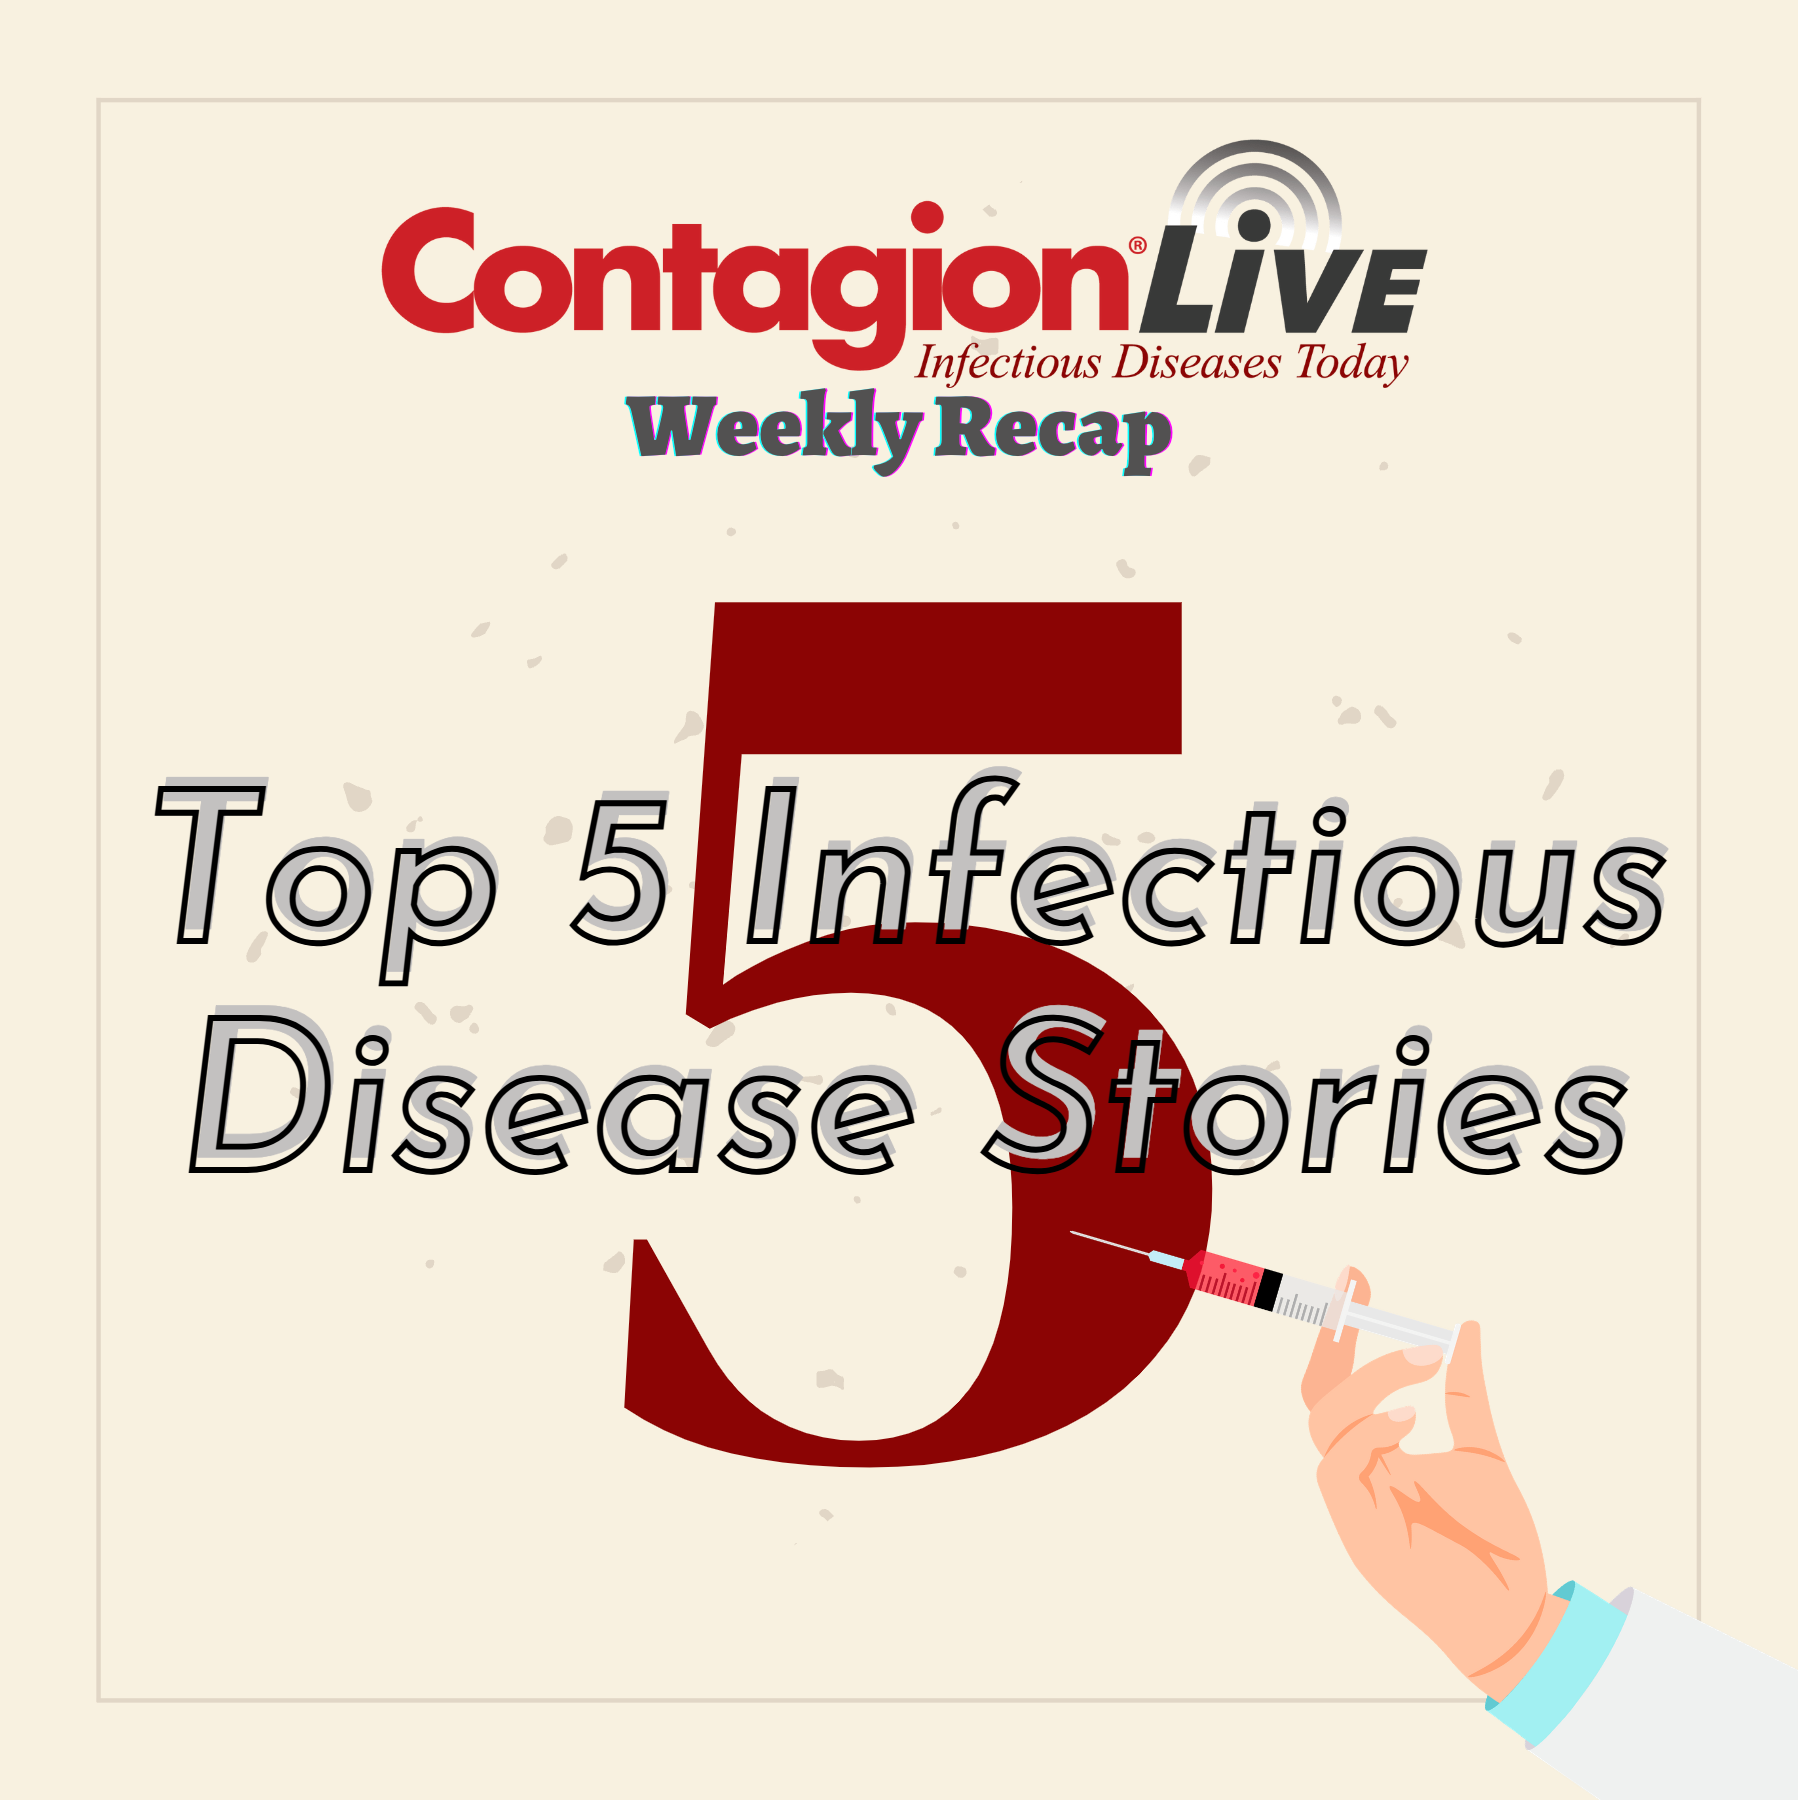 From Lettuce Recalls to New Moderna Vaccines: This Week’s Top 5 Stories